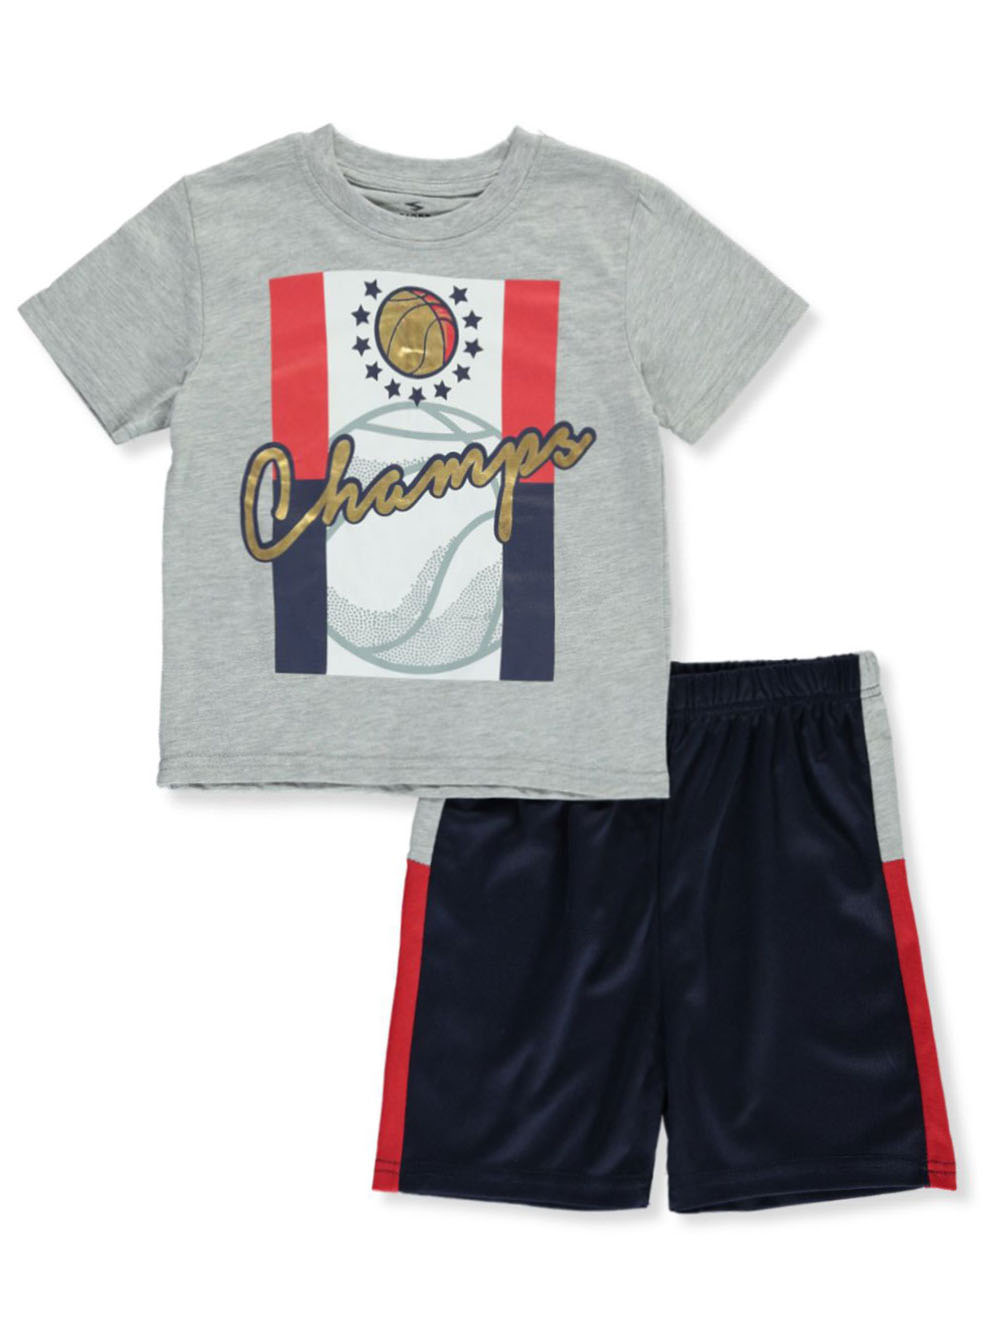 champs outfit